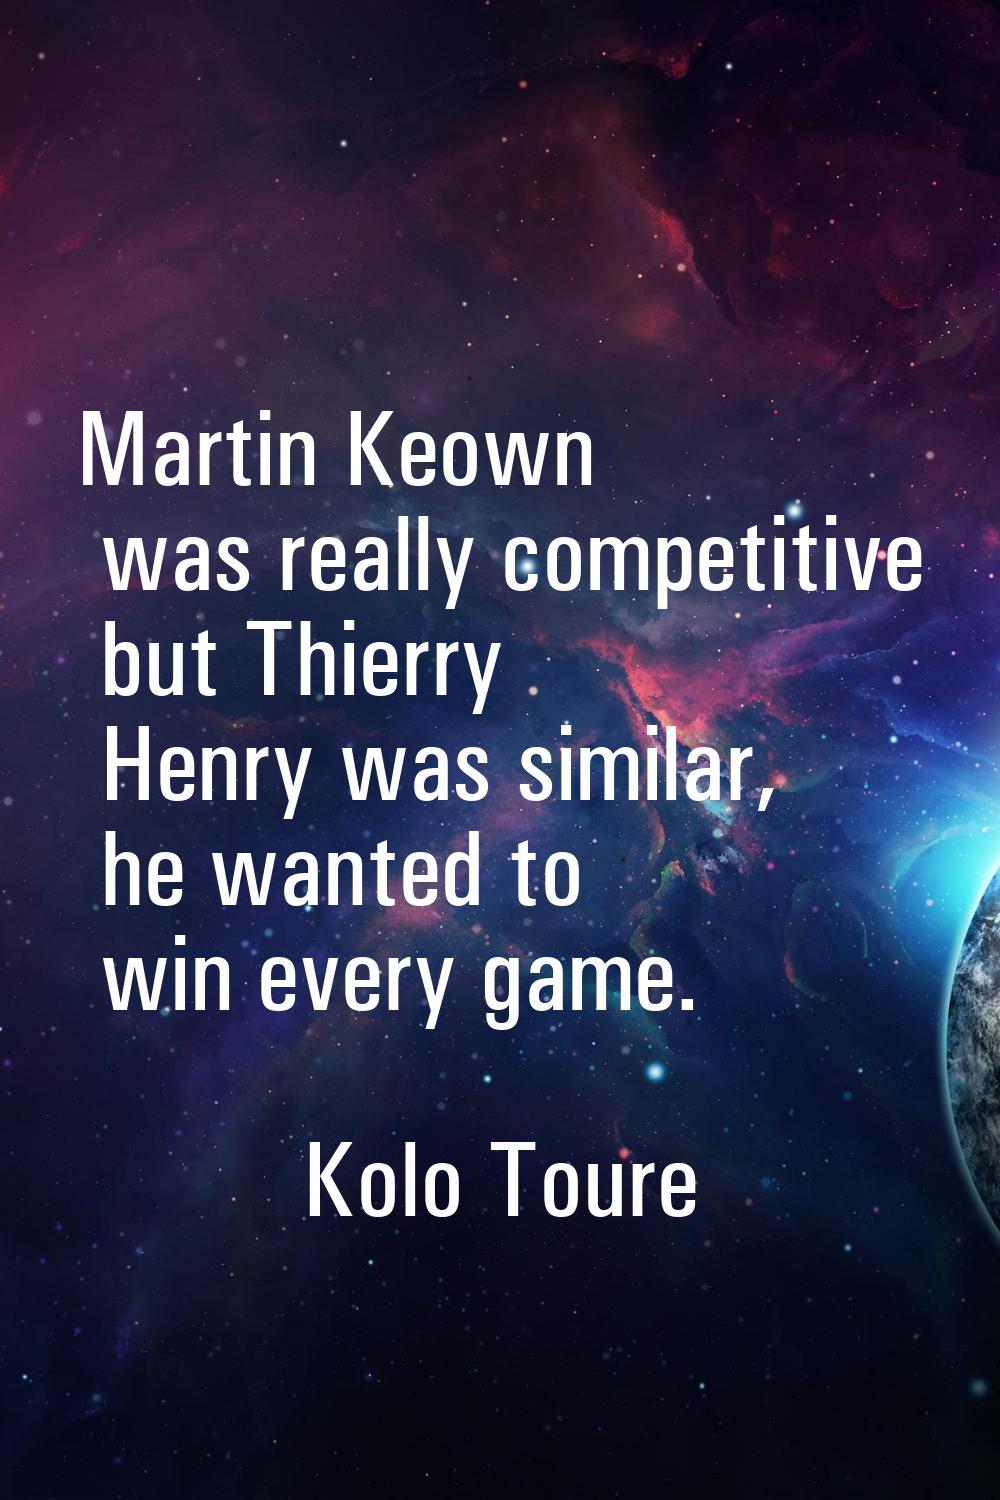 Martin Keown was really competitive but Thierry Henry was similar, he wanted to win every game.